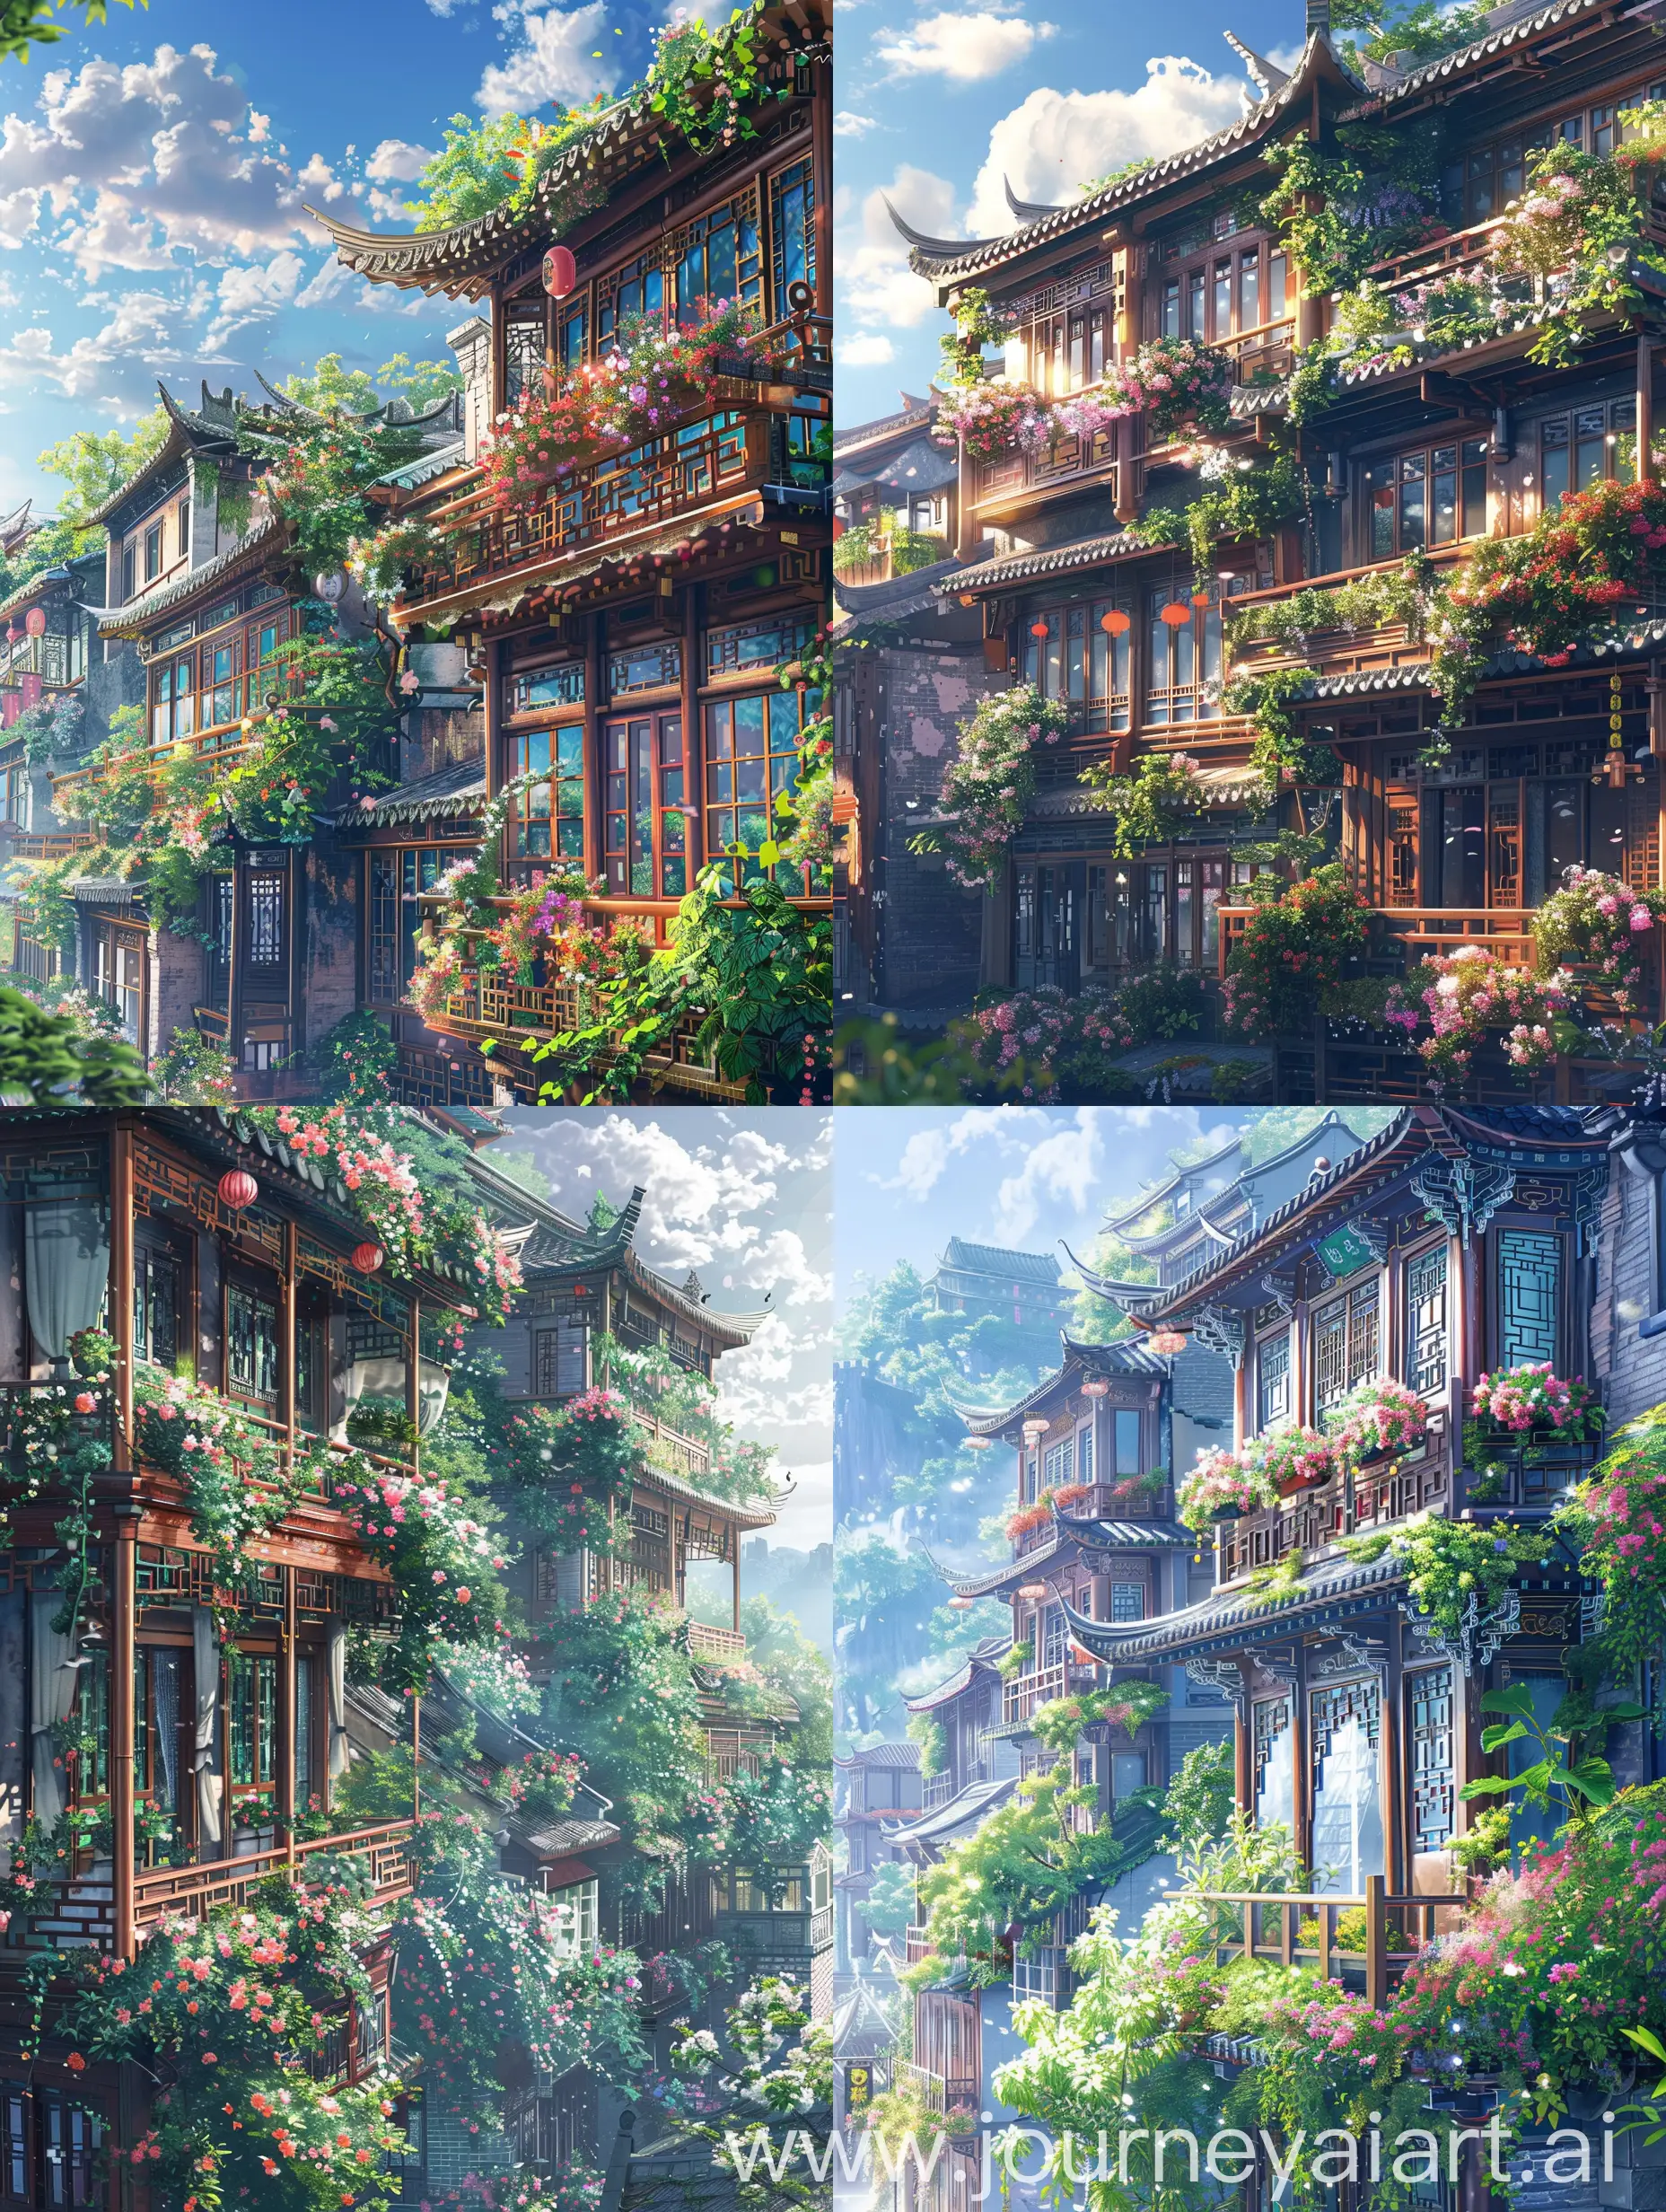 Dreamy-Anime-Scene-Tang-Dynasty-Building-with-Balconies-and-Flowerfilled-Windows